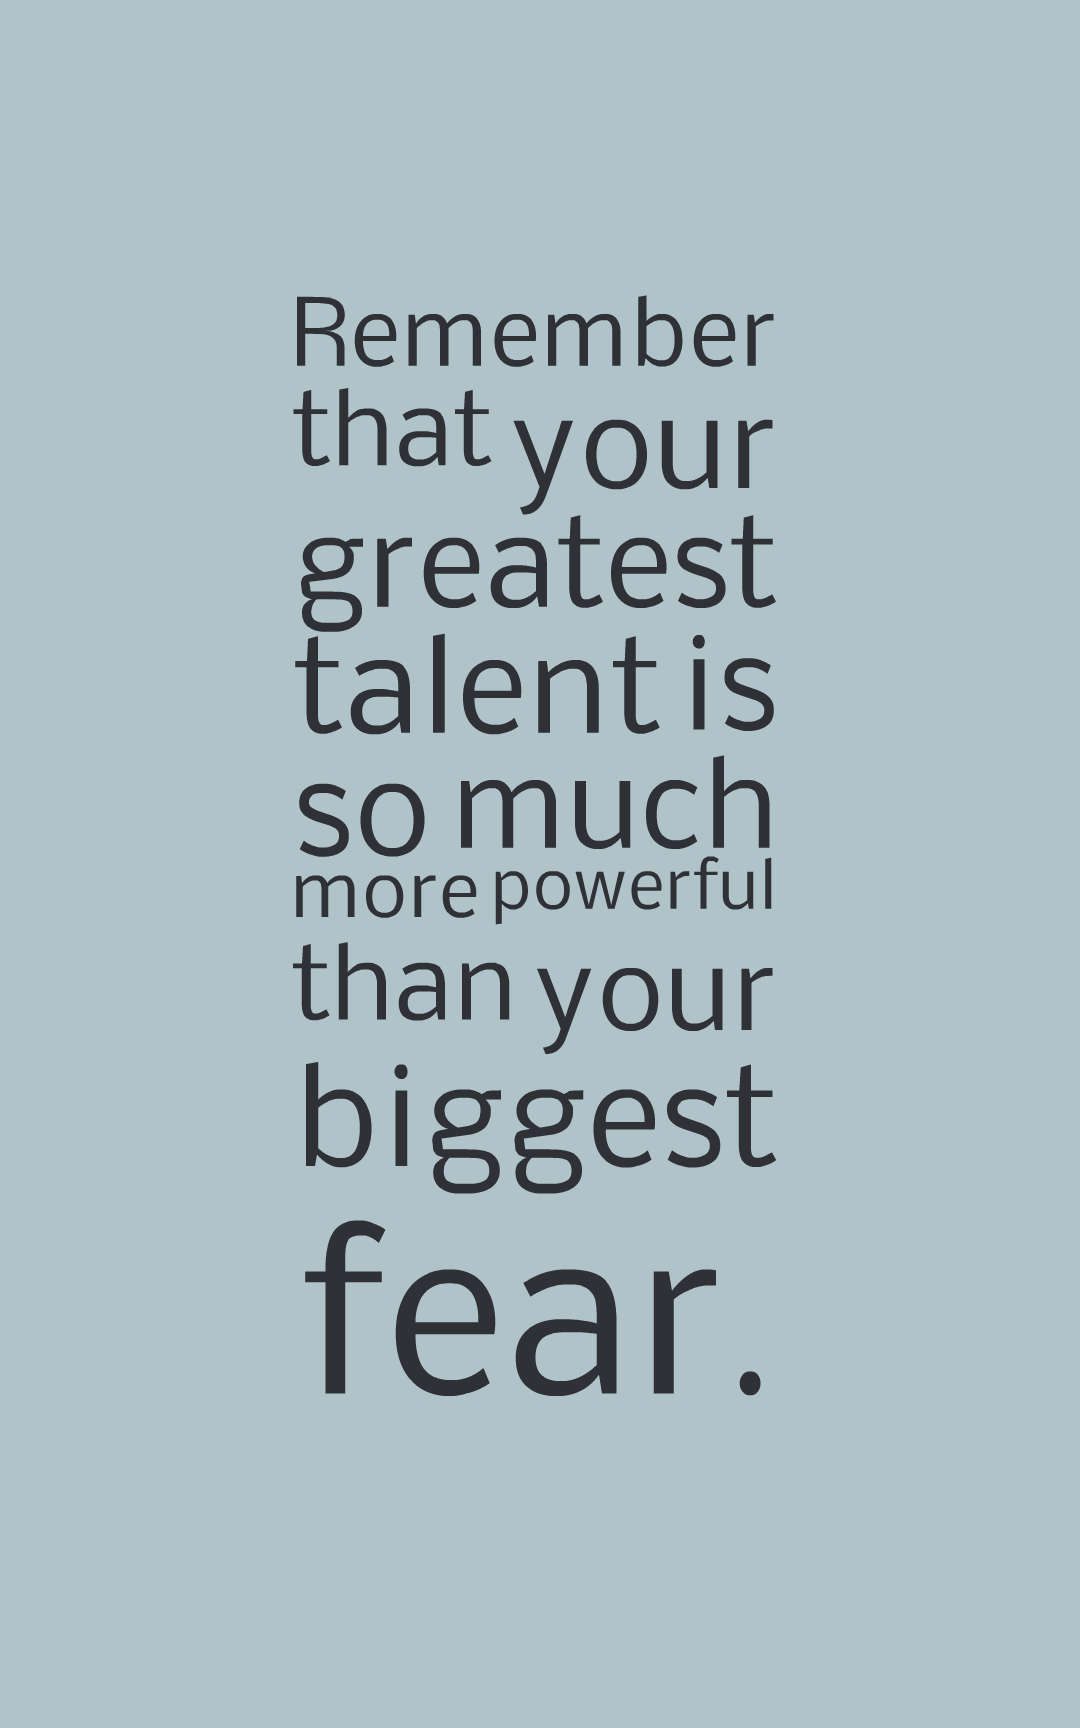 Remember that your greatest talent is so much more powerful than your biggest fear.